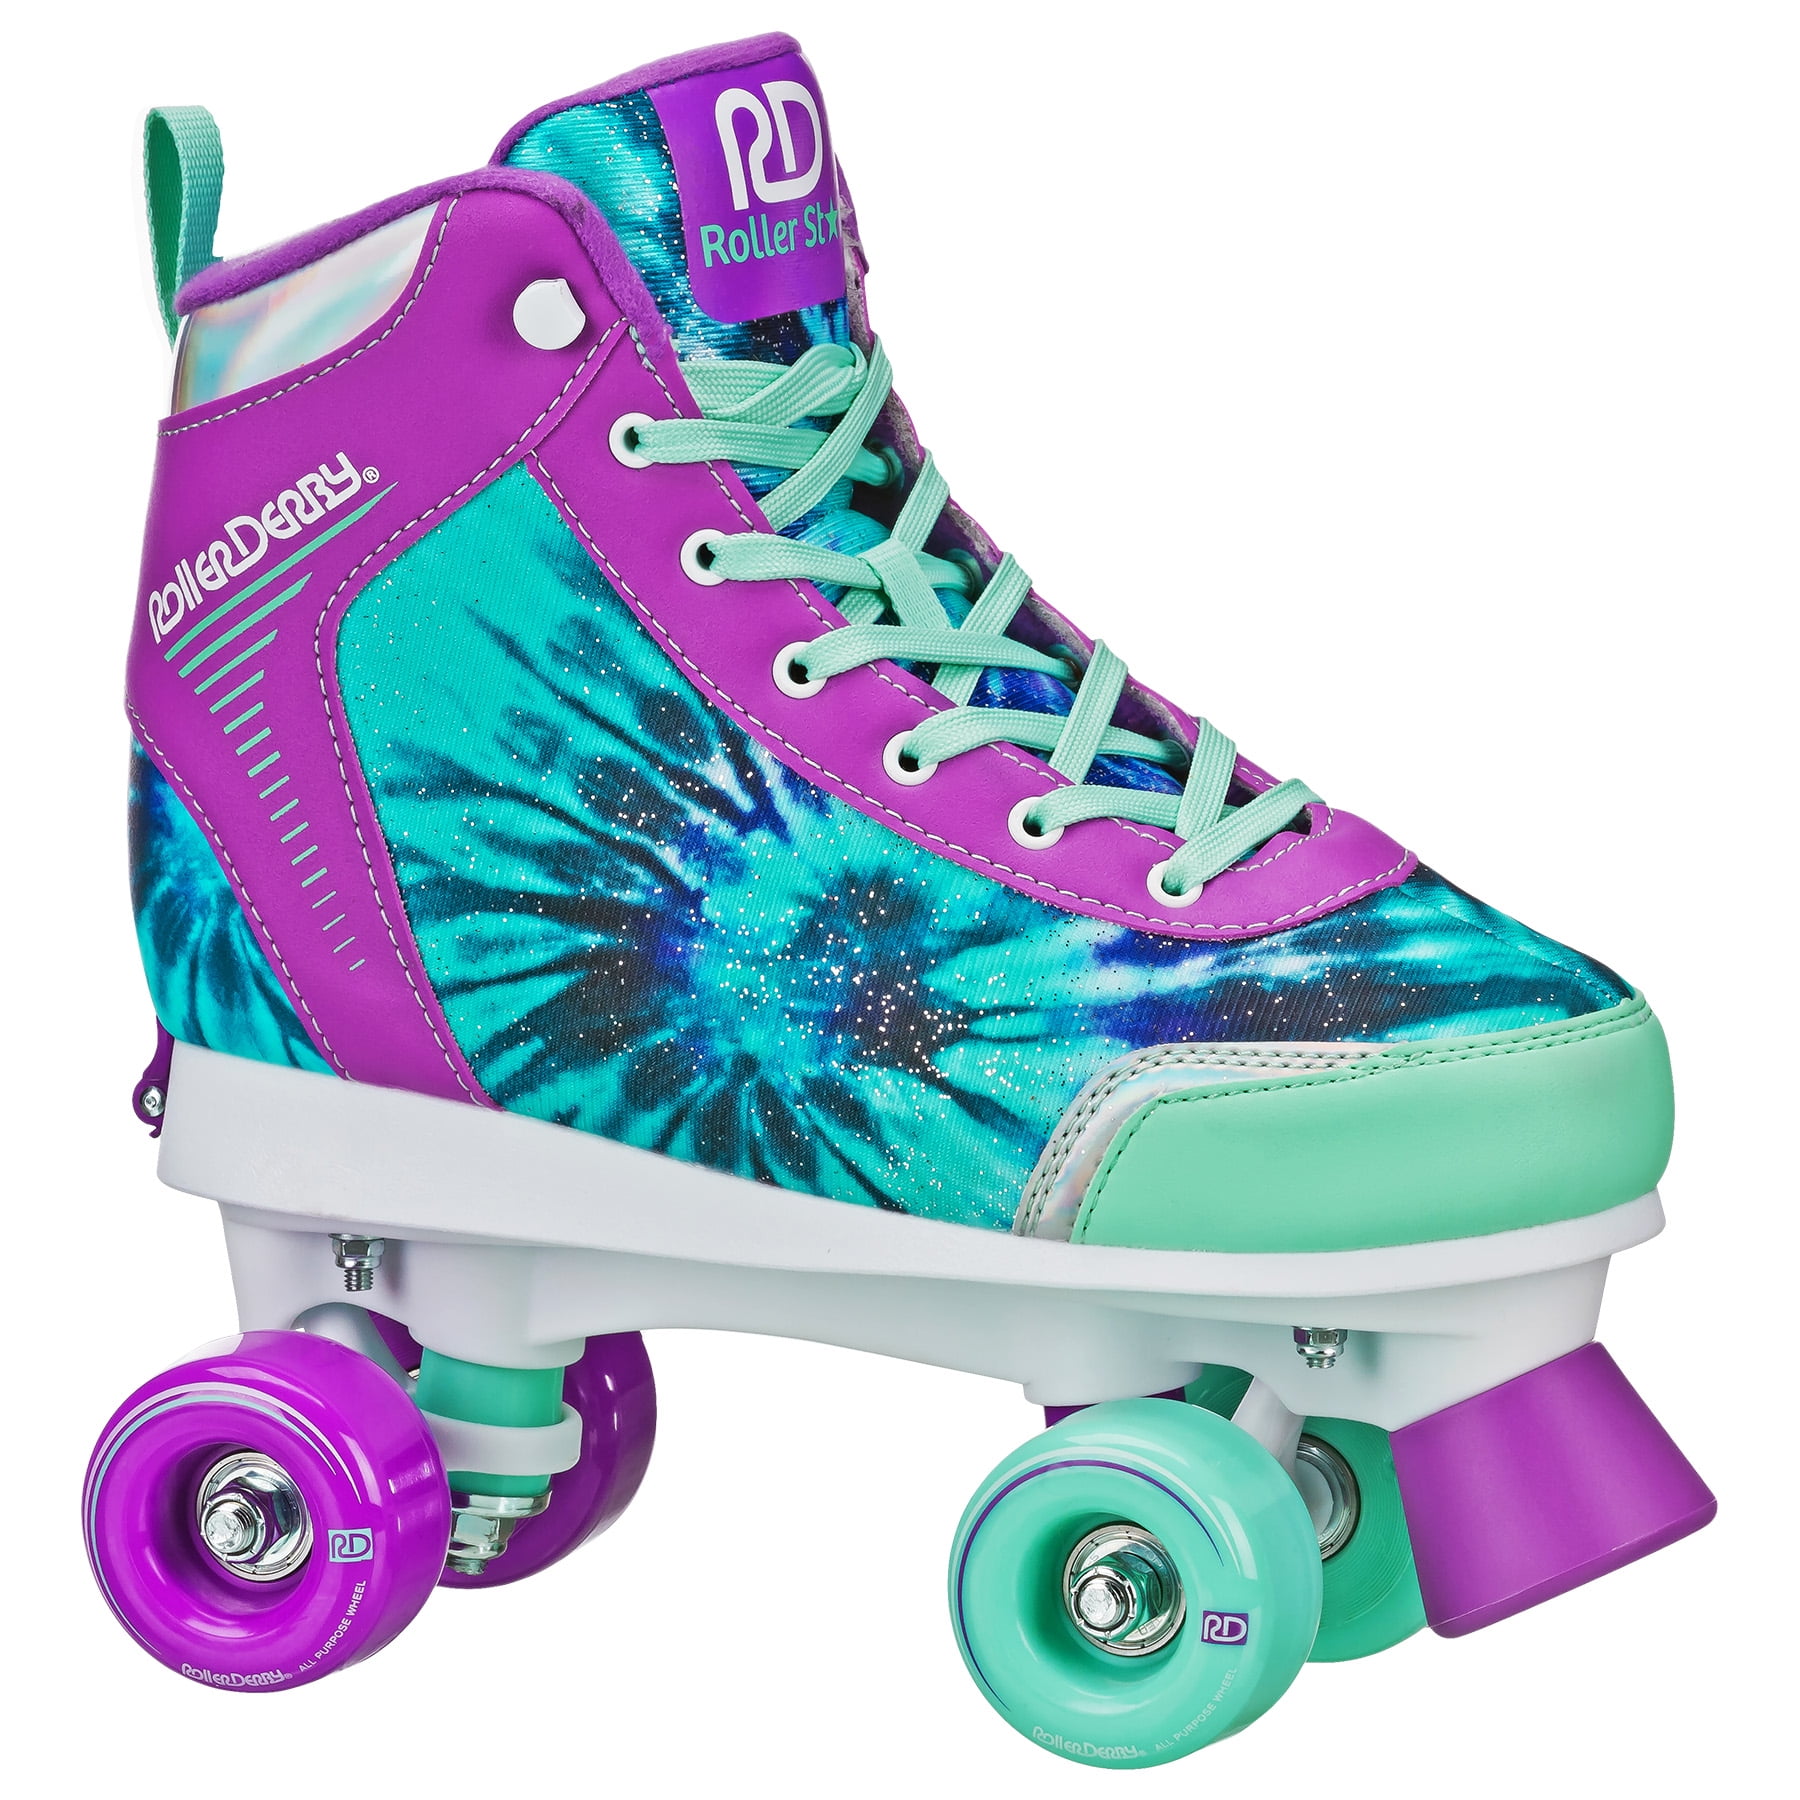 New Zero Nuts Roller Derby Roller Skating FREE SHIPPING 